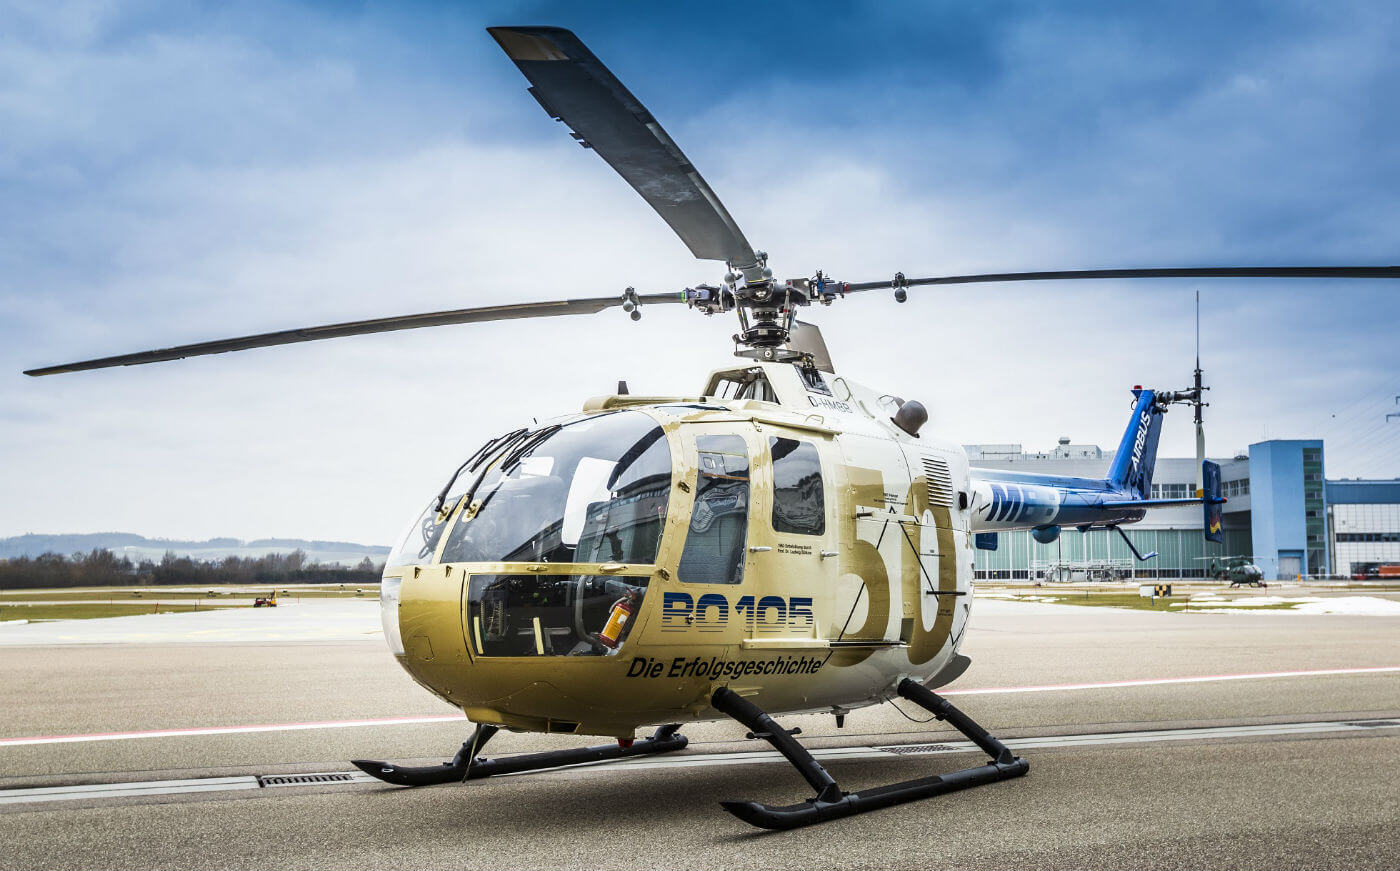 Since the BO105’s first delivery in 1970, more than 300 customers around the world have purchased a total of some 1,400 aircraft, which have been operated in air rescue, as a police and military helicopter, as well as for VIP, passenger and cargo transportation. Airbus Photo